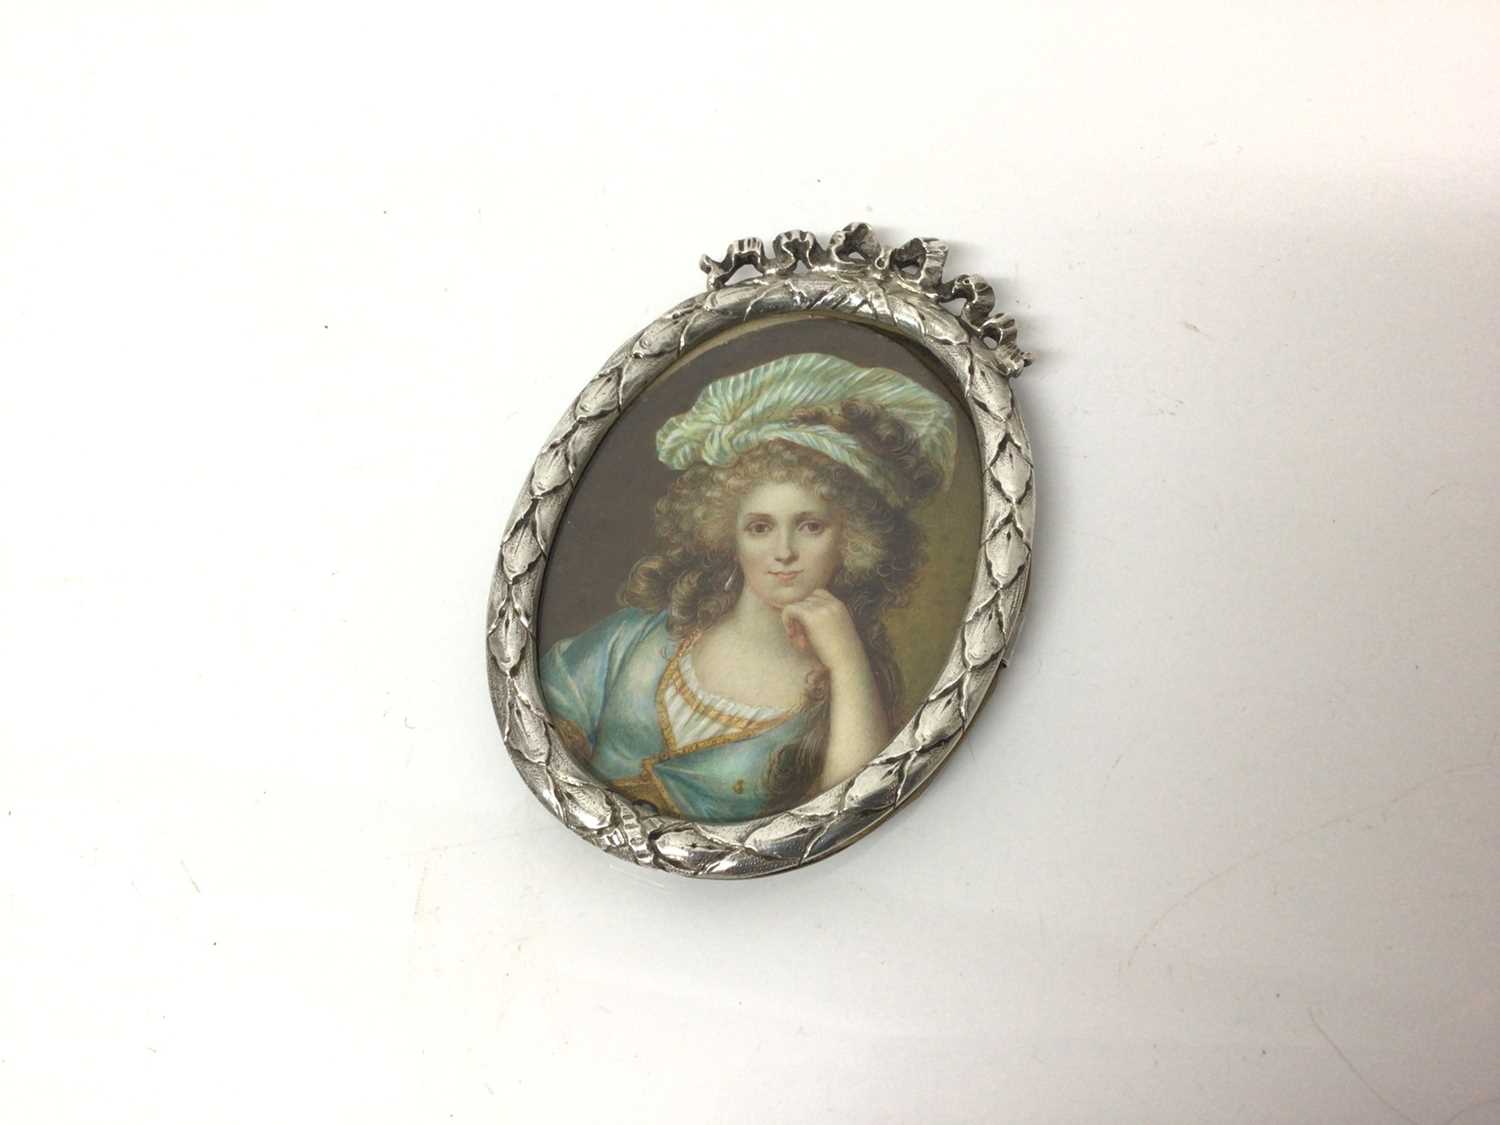 Lot 33 - Fine 18th century portrait miniature on ivory of Louise Marie Adélaïde de Bourbon, Duchess of Orléans, in silver frame, titled to reverse, 10.5cm high including frame